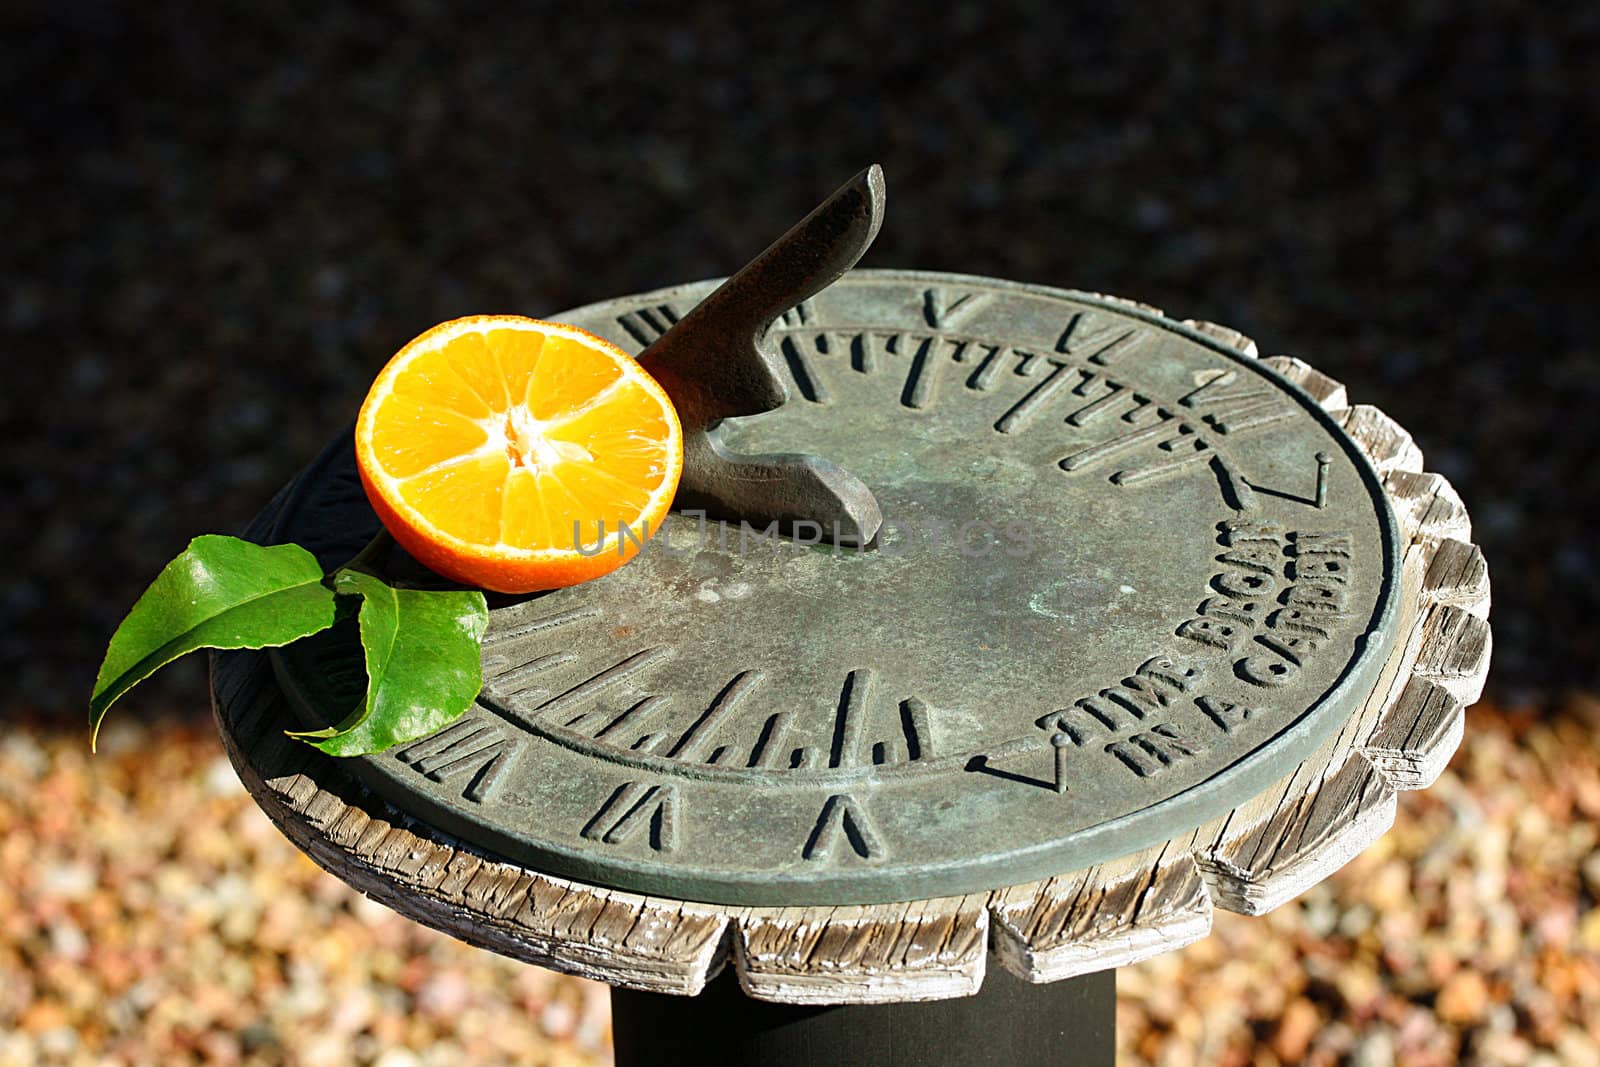 Half of a tangerine with leaves on a sundial.